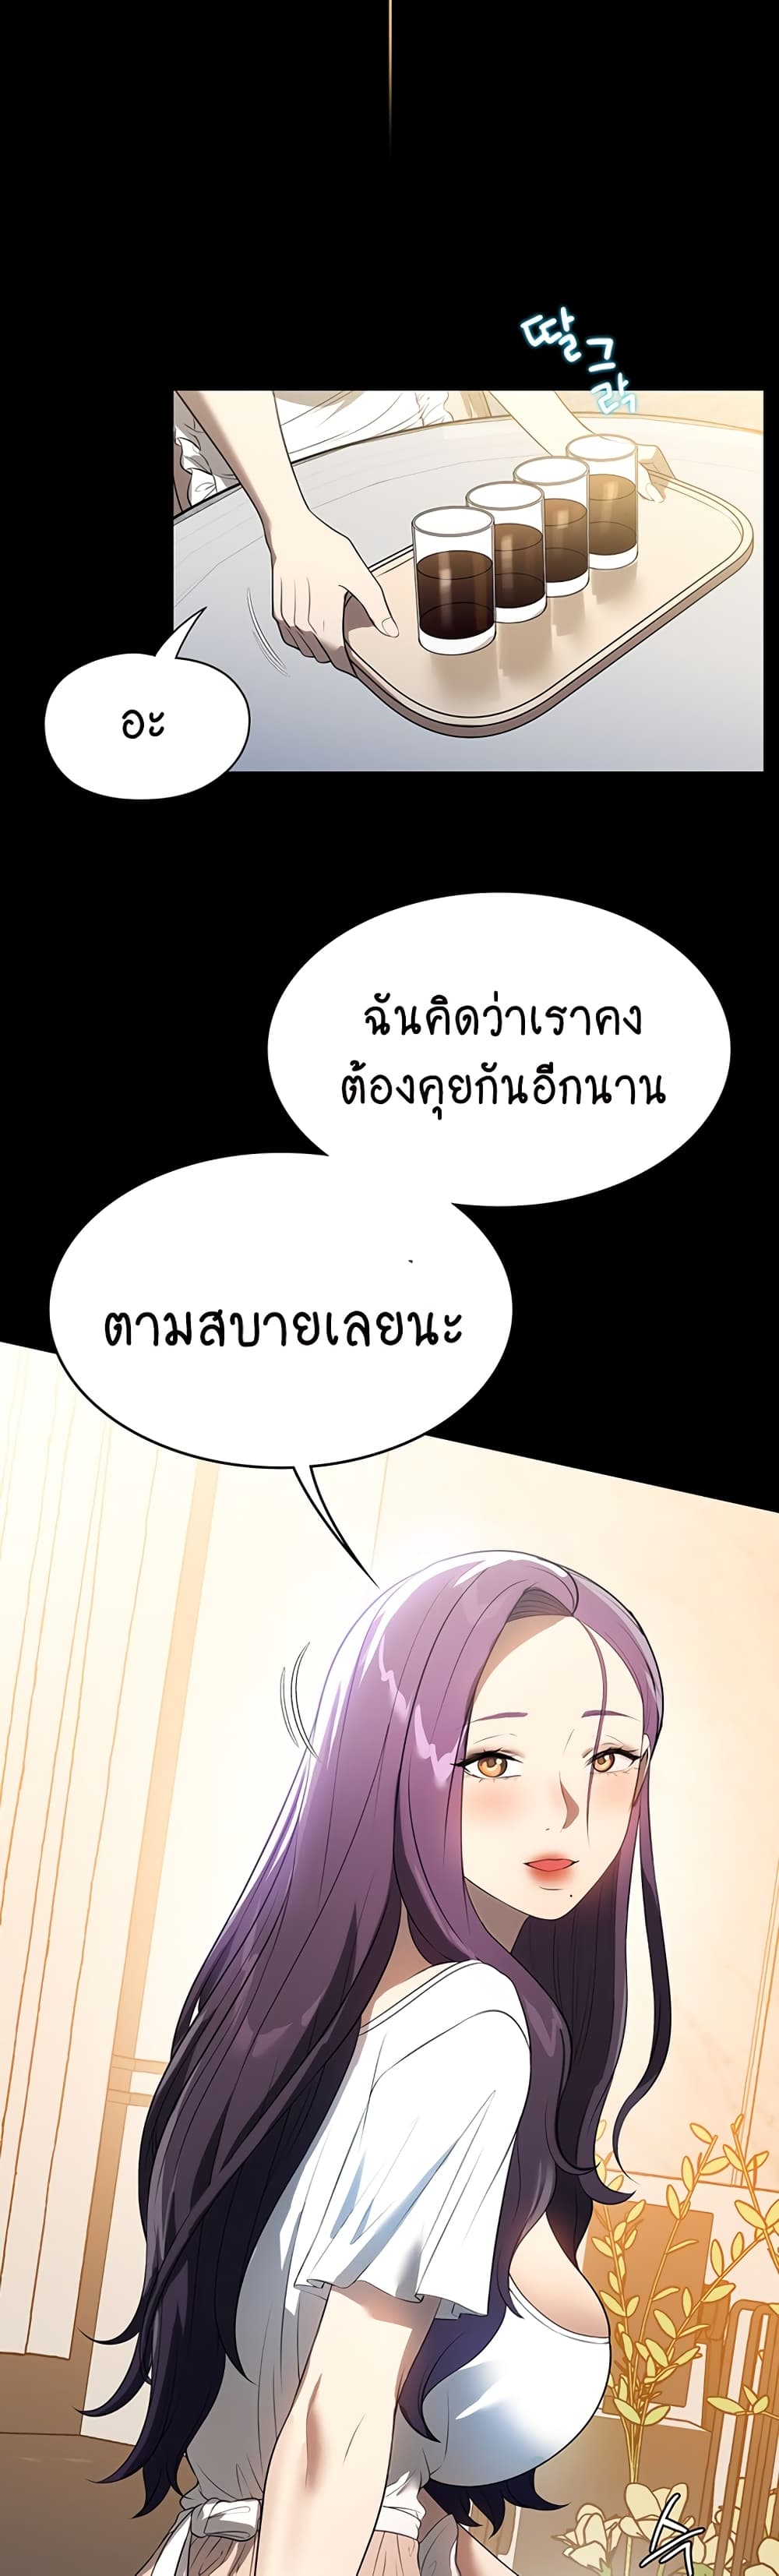 A Young Maid 56-ตอนจบ